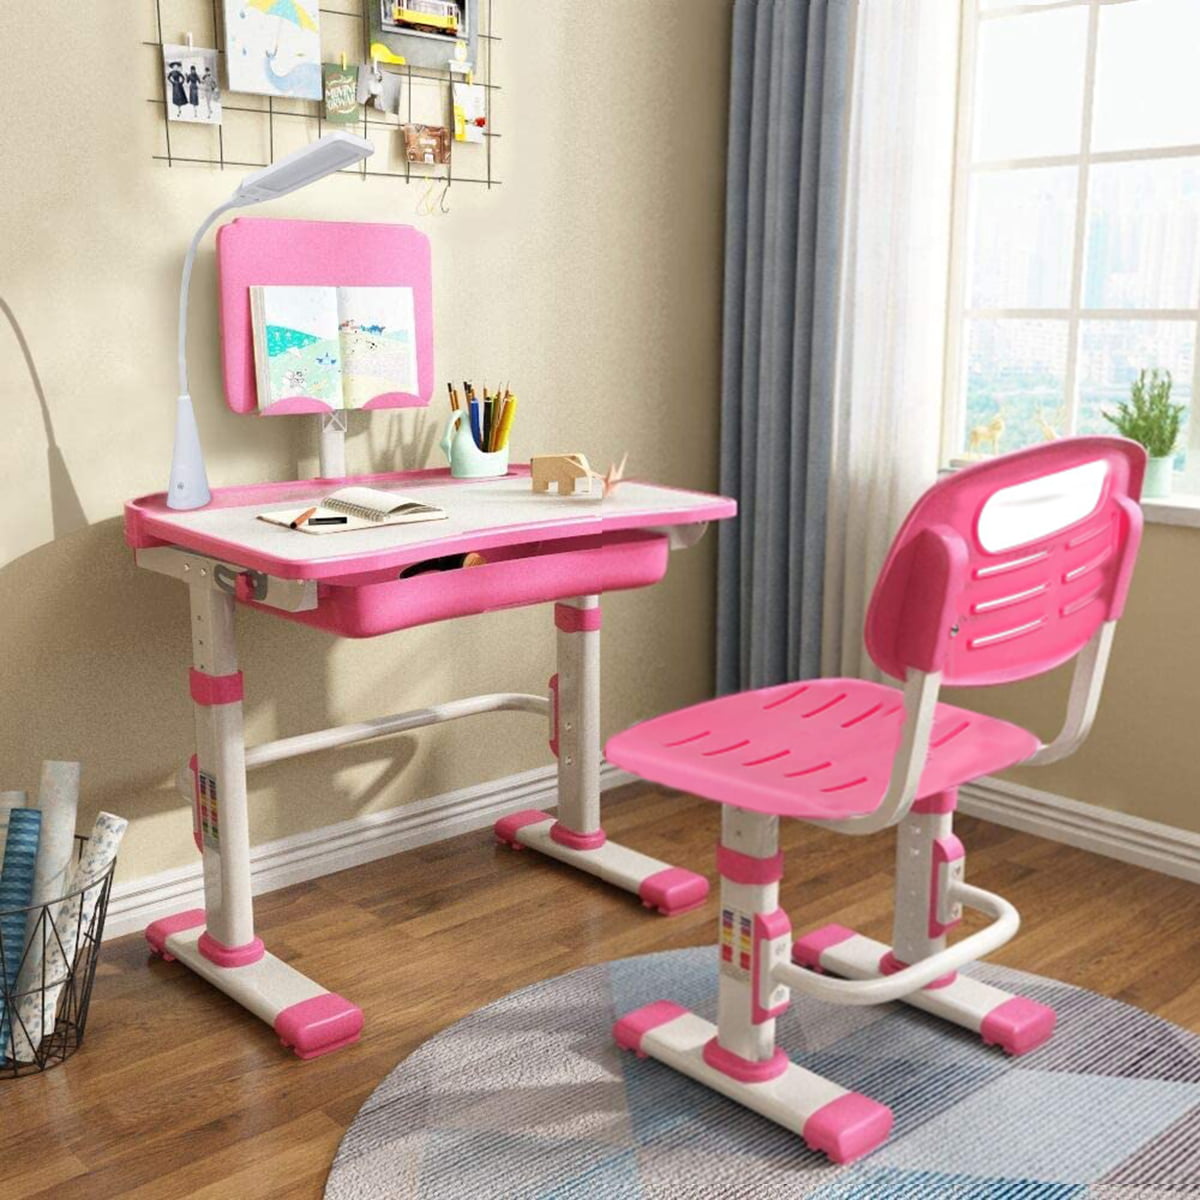 Childrens Study Desk Chair Set Multifunctional Study Table with Book Stand Height Adjustable Writing Desk Table